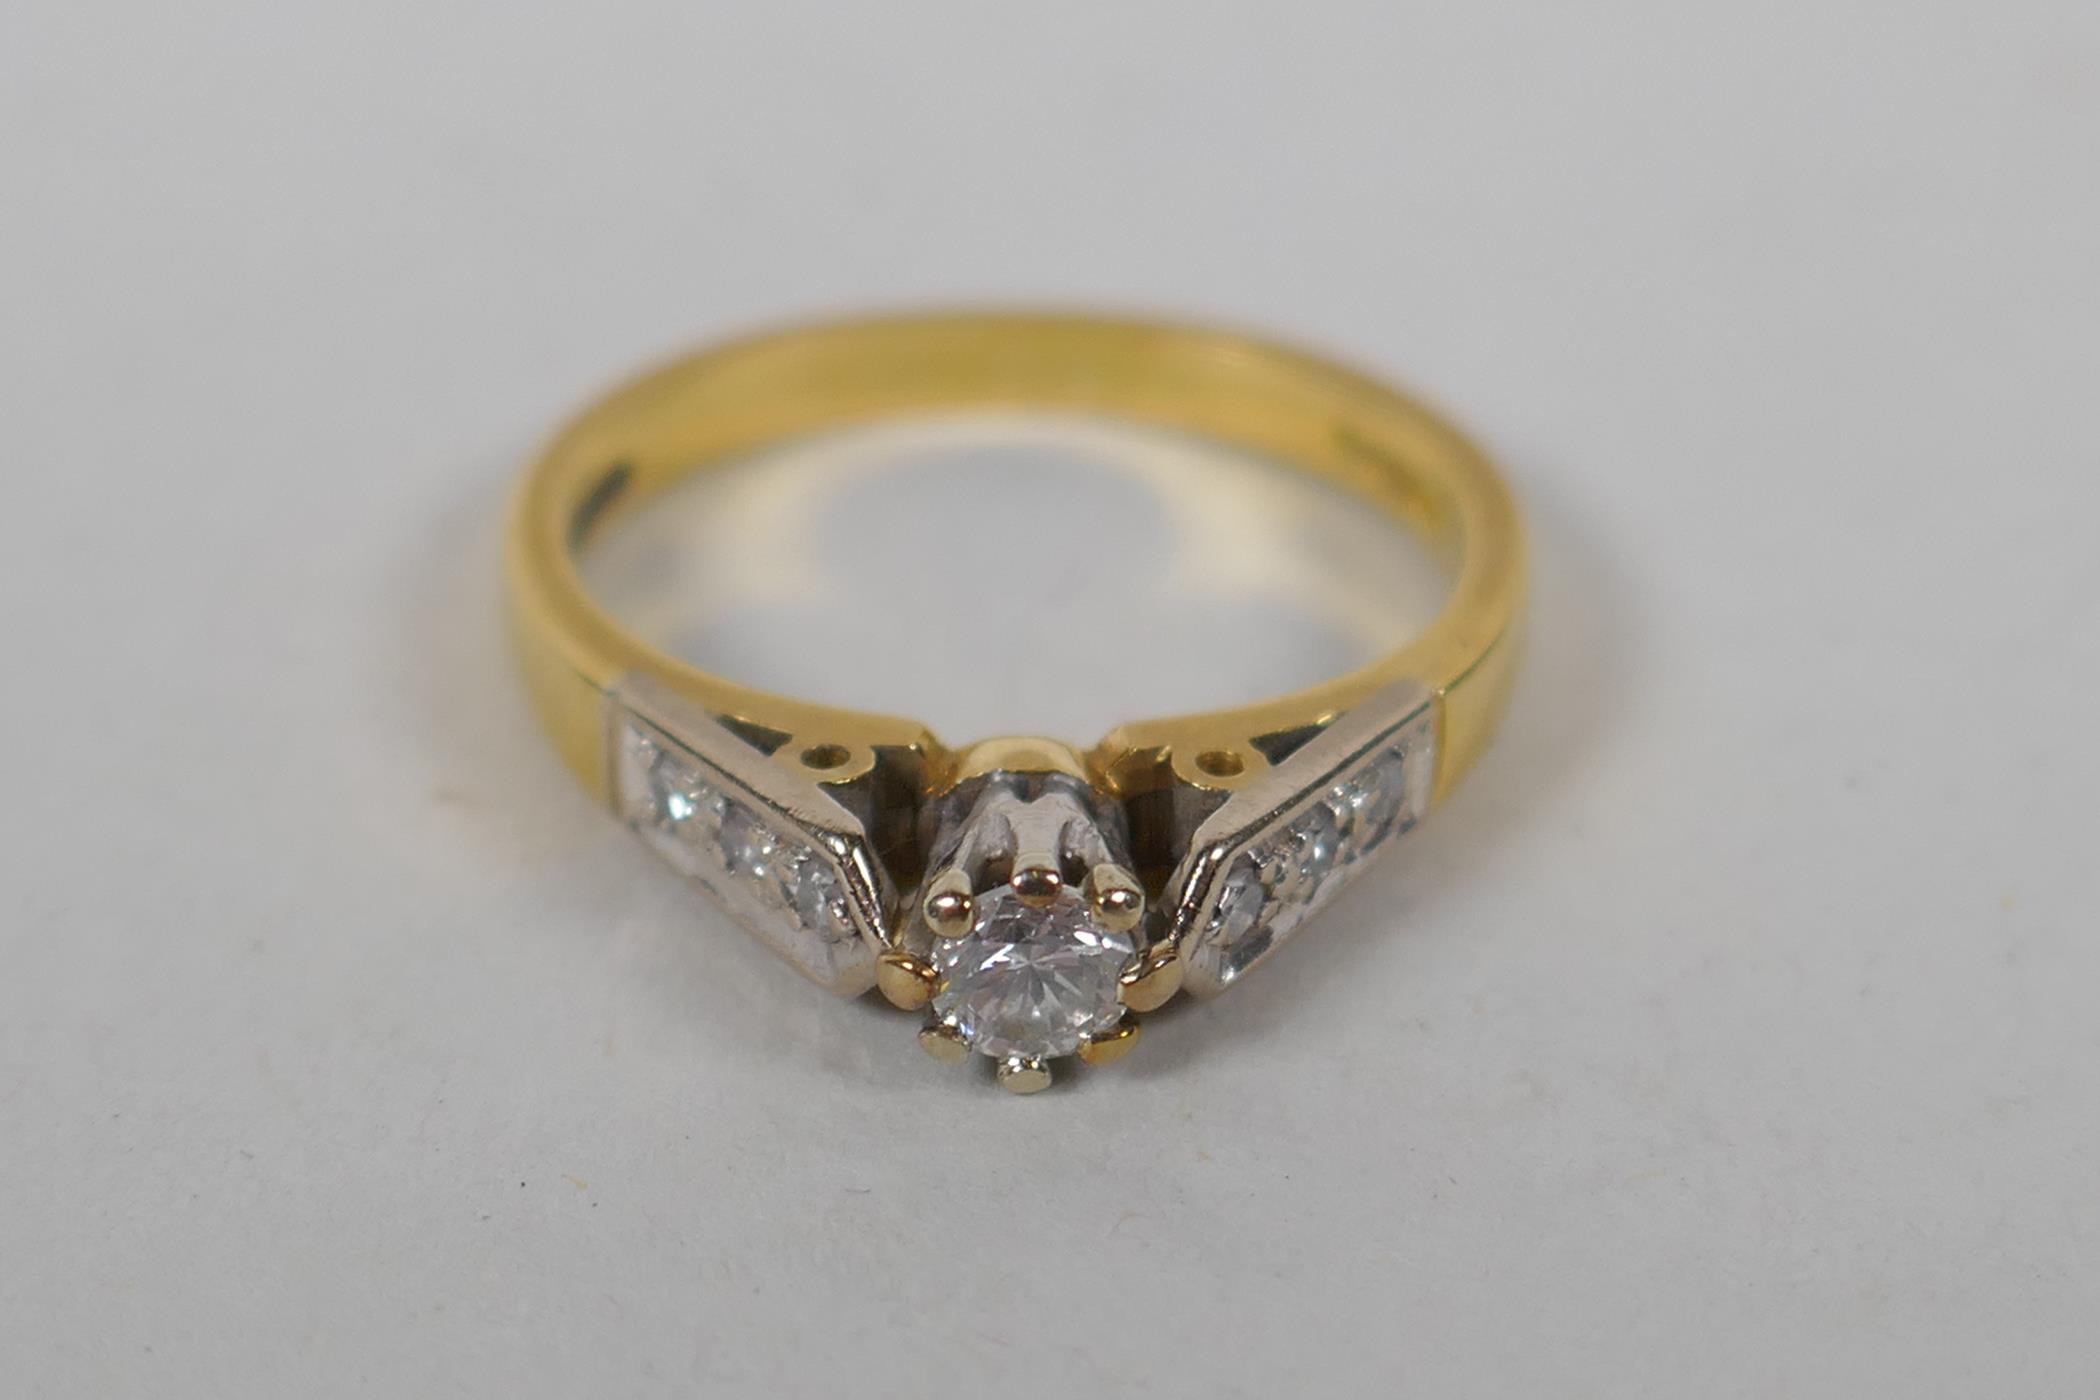 An 18ct yellow gold and diamond ring, with a central set diamond and three diamonds set to each